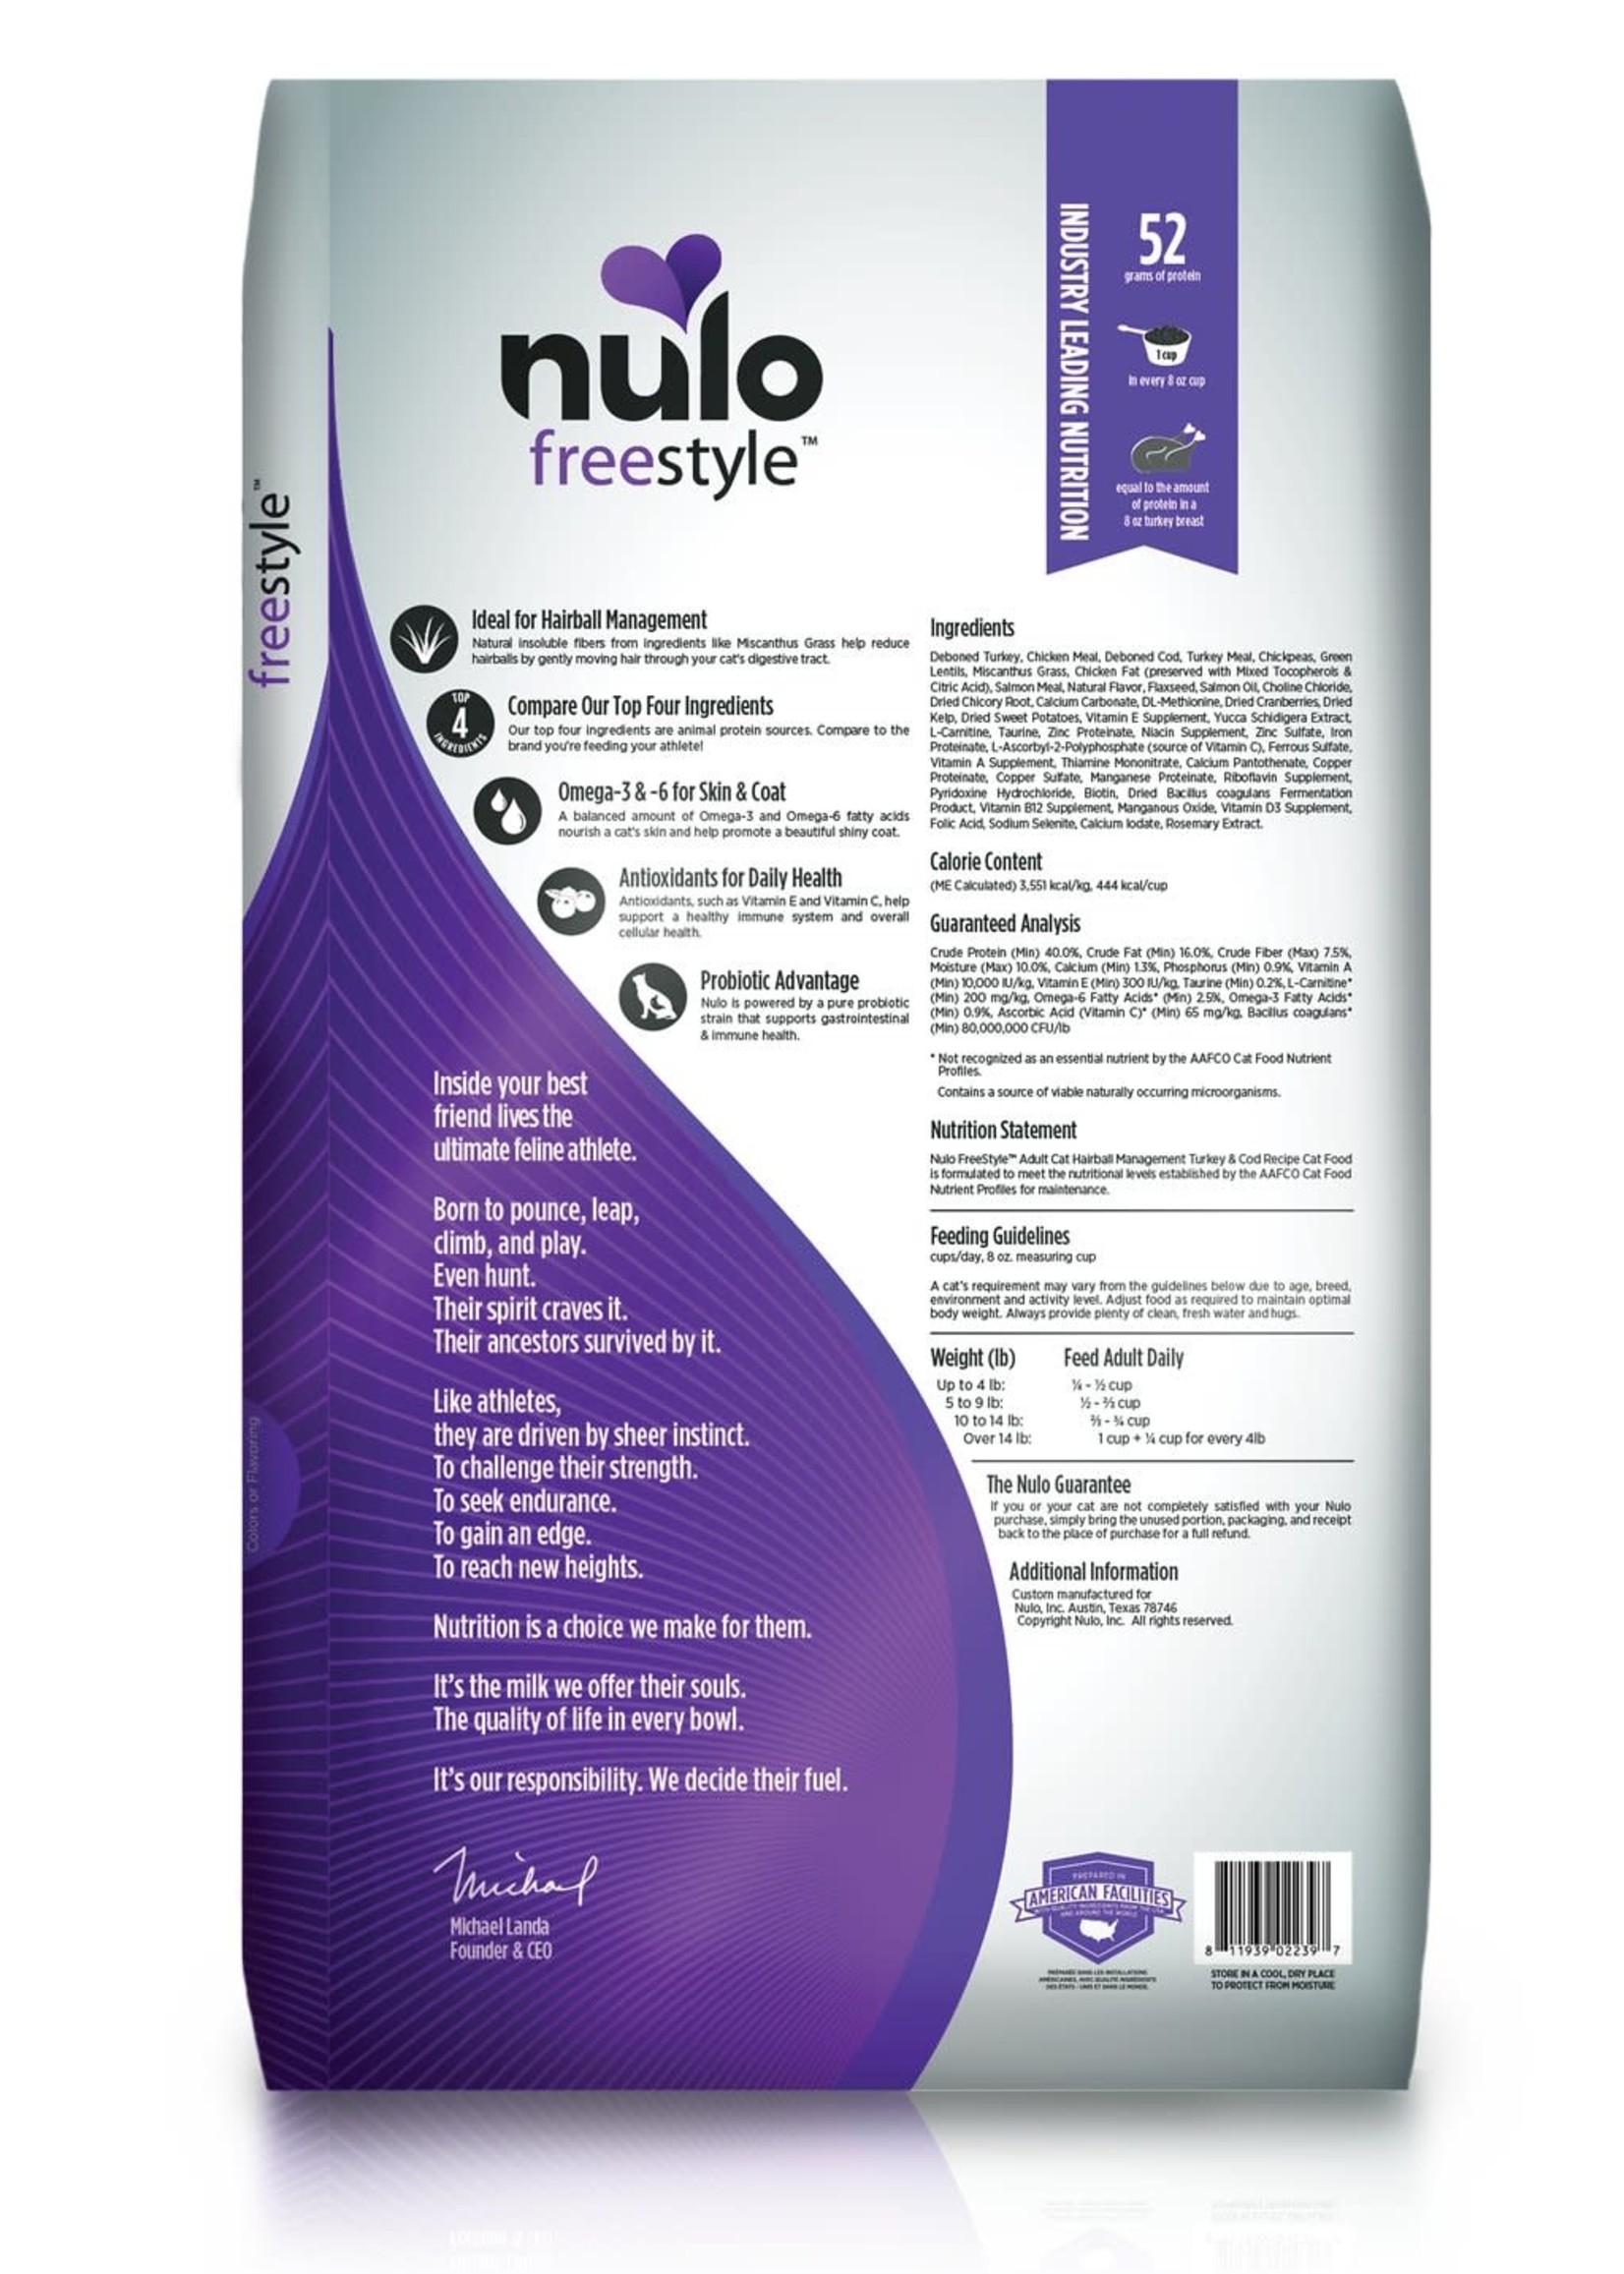 Nulo Nulo Freestyle Cat Dry Hairball Management Turkey and Cod